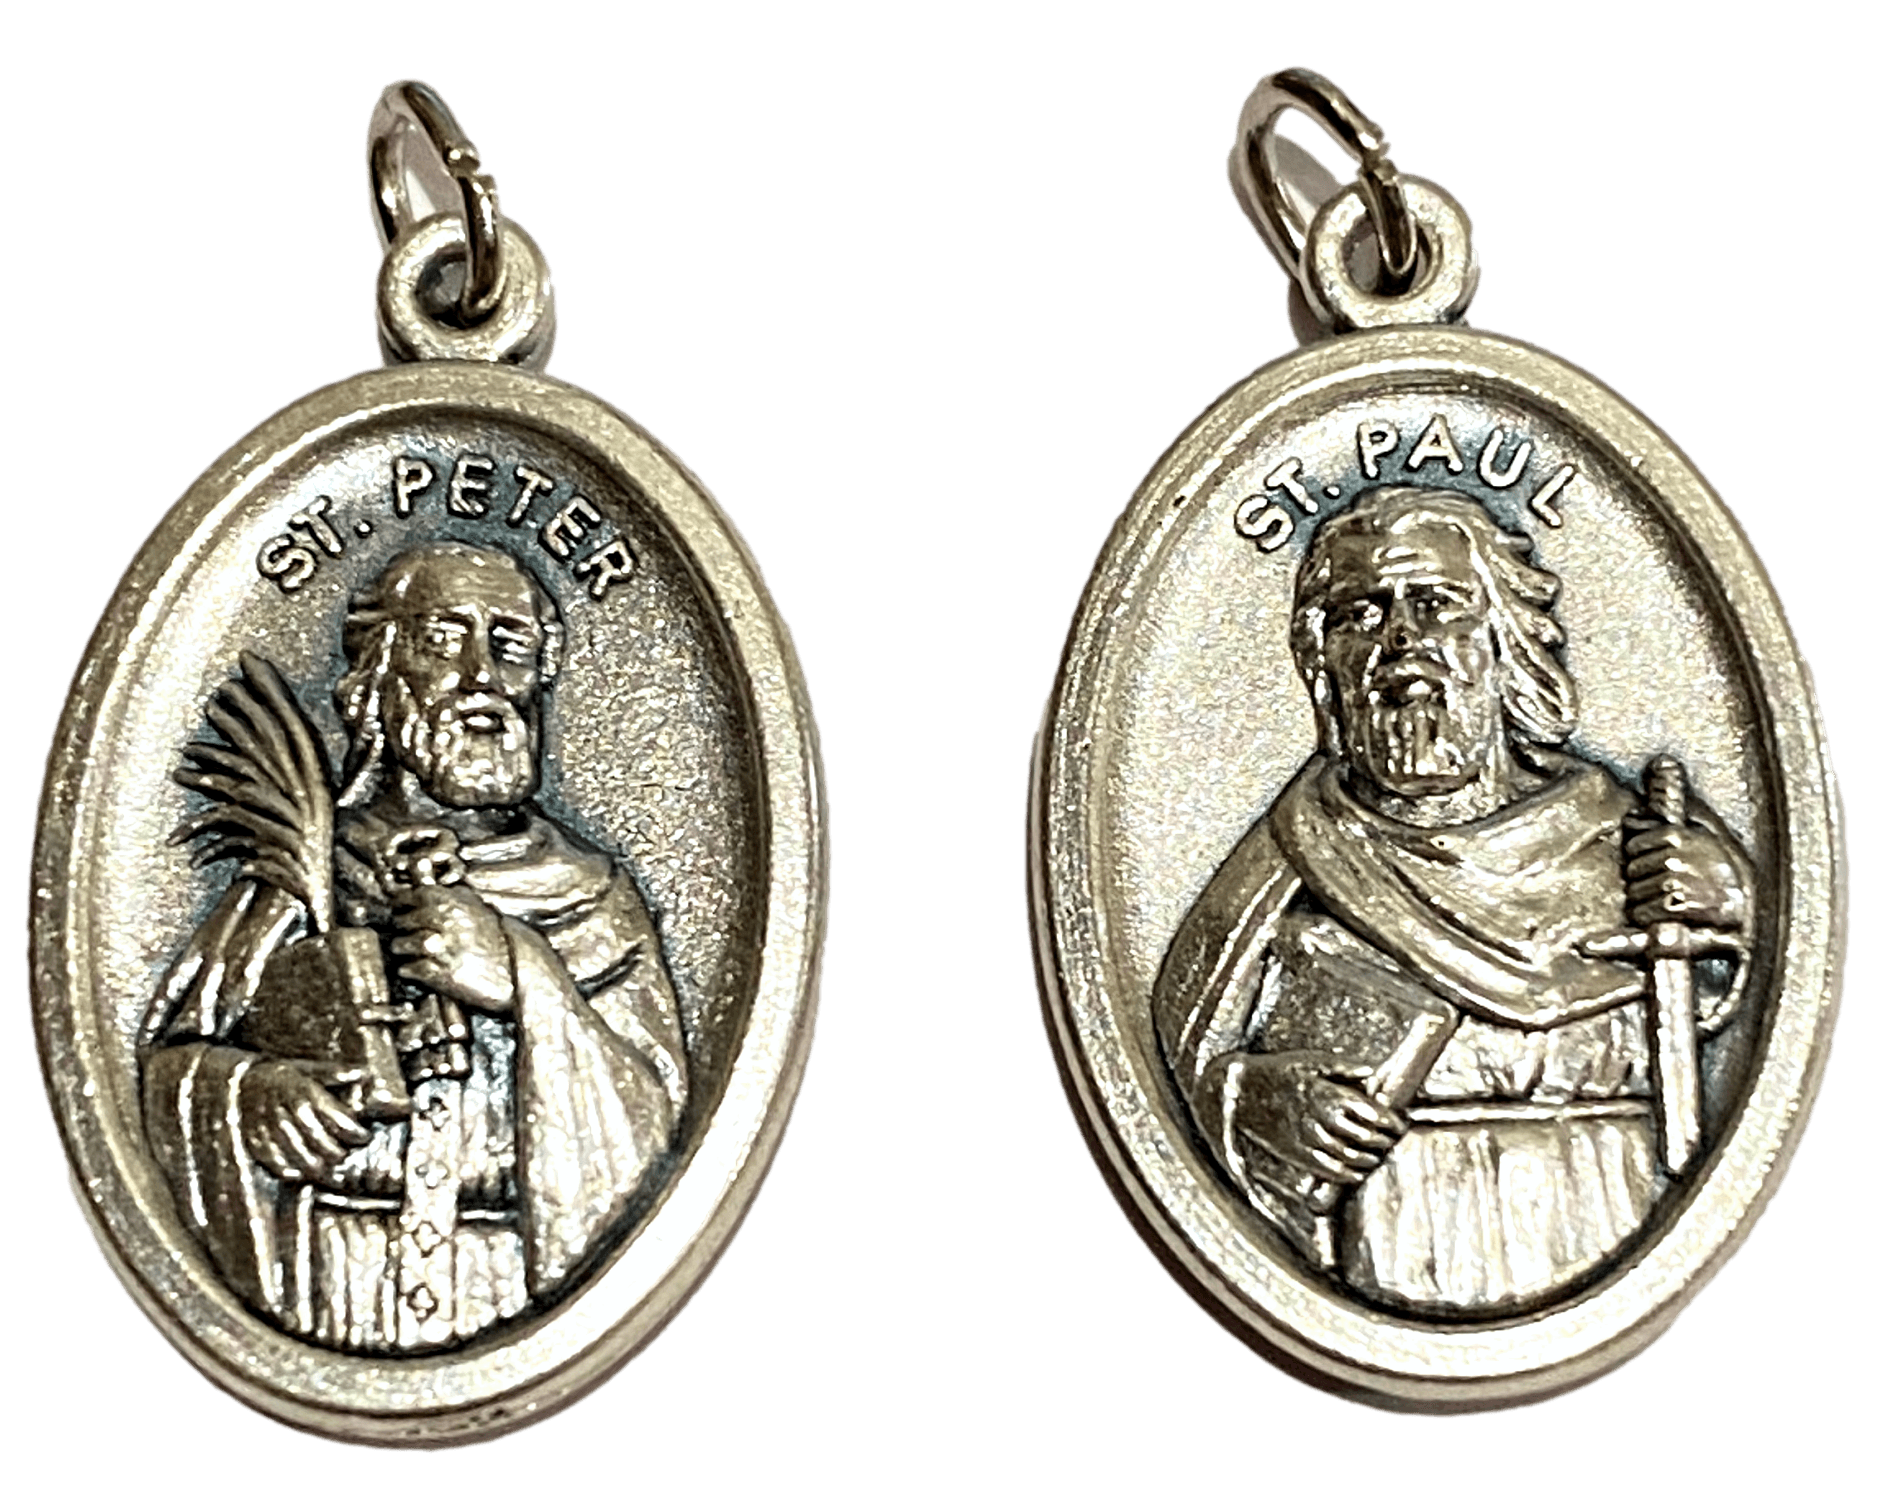 Medal Saint Peter Saint Paul Italian Double-Sided Silver Oxidized Metal Alloy 1 inch - Ysleta Mission Gift Shop- VOTED El Paso's Best Gift Shop